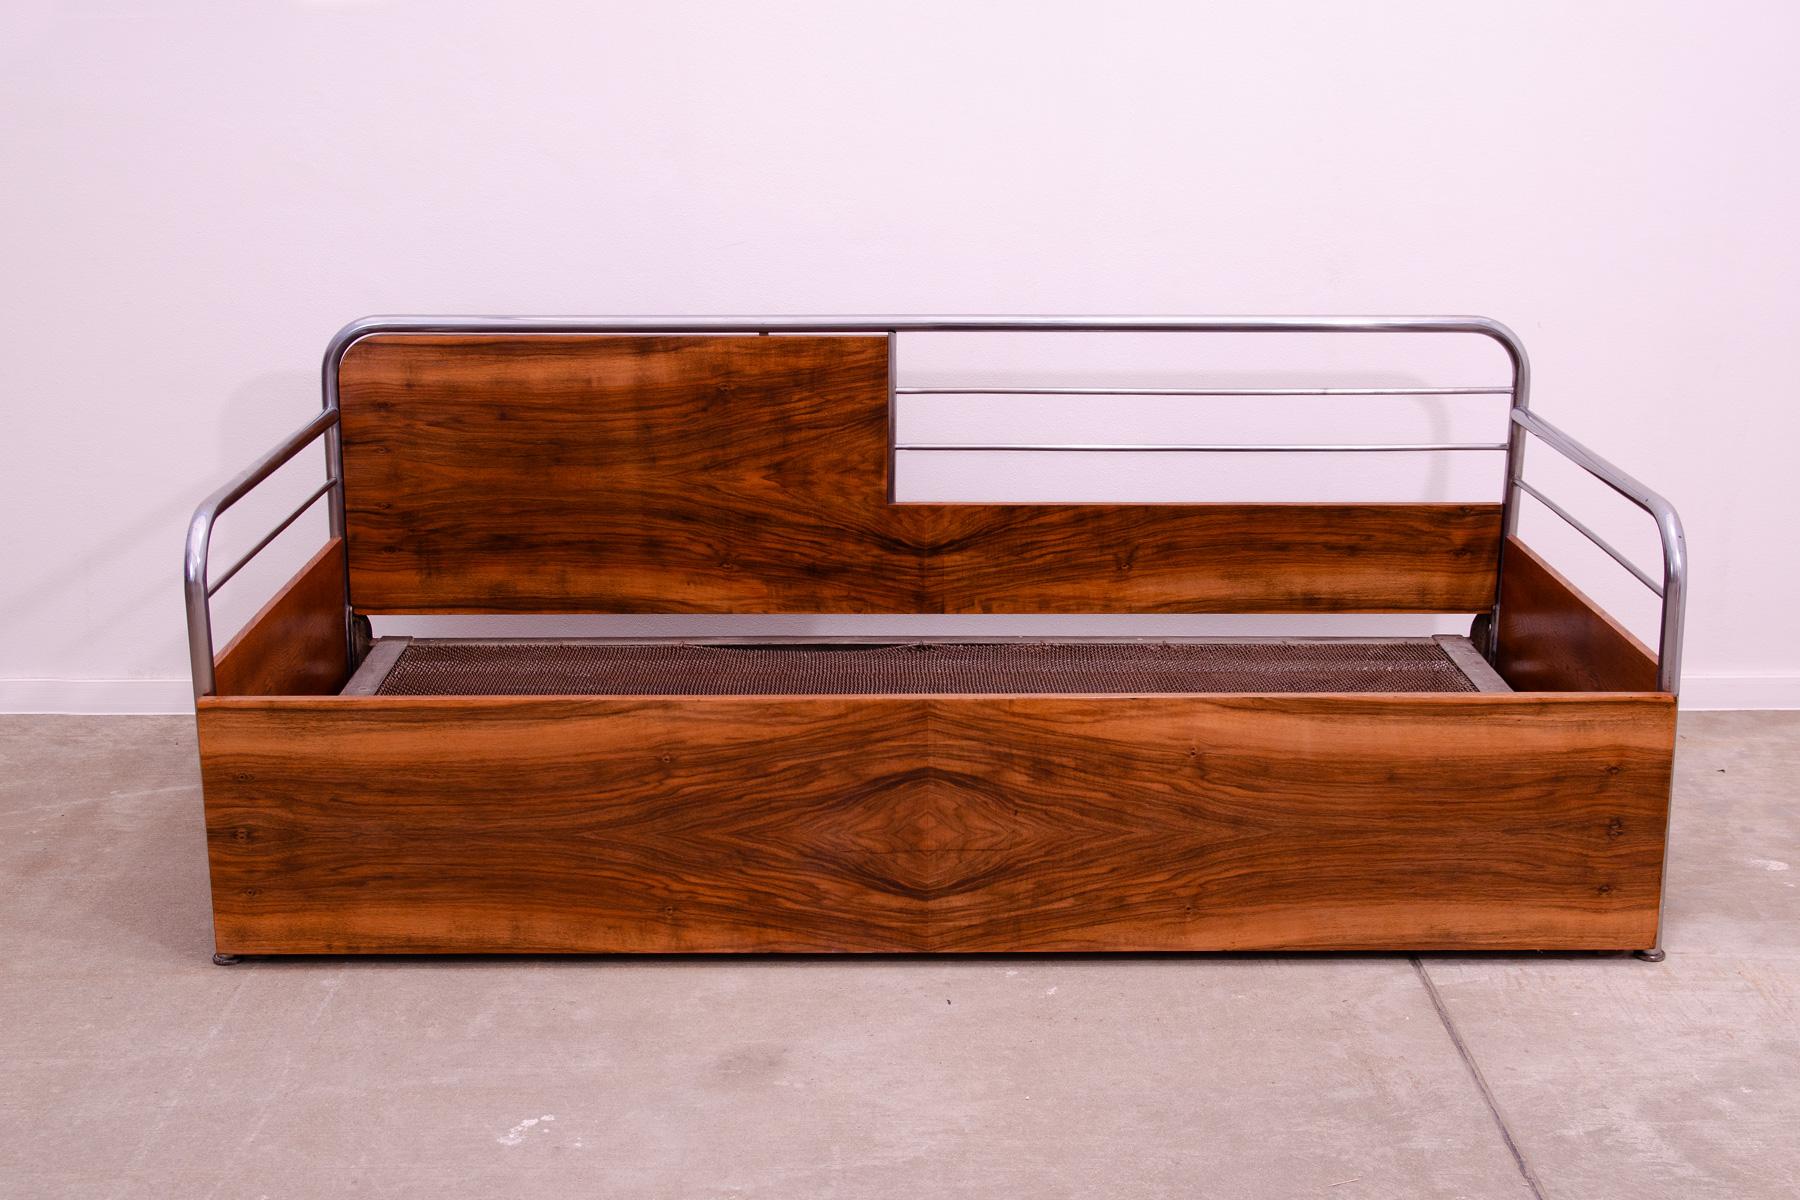 This sofa bed is among the relatively unusual preserved pieces on our market. It was made in the 1930s, probably in the former Czechoslovakia. It is made of wood and bent chrome tubes.
It was completely restored, the chrome was polished, the wooden